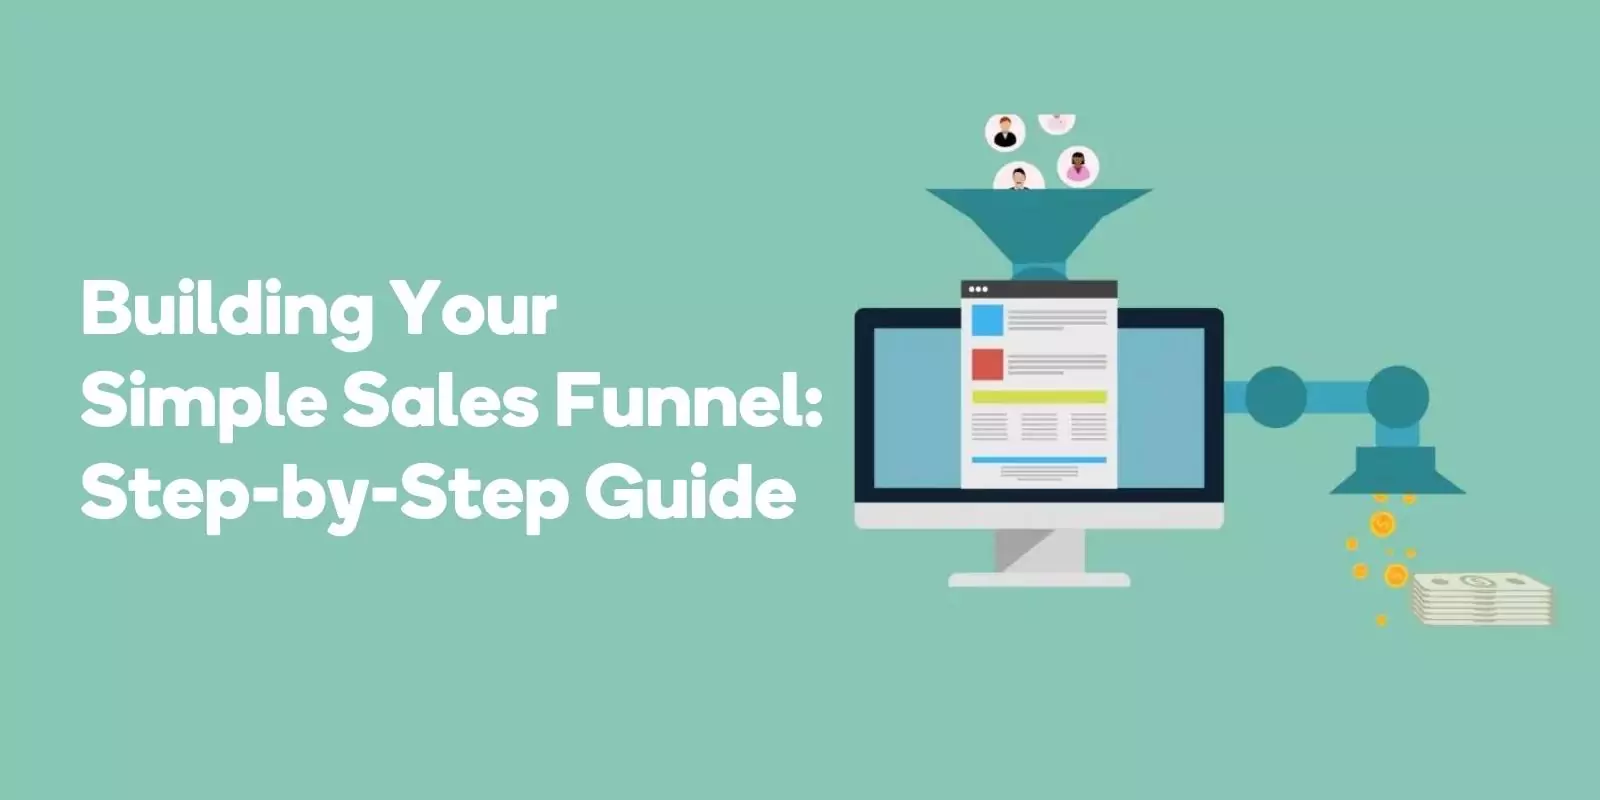 Building Your Simple Sales Funnel Step-by-Step Guide